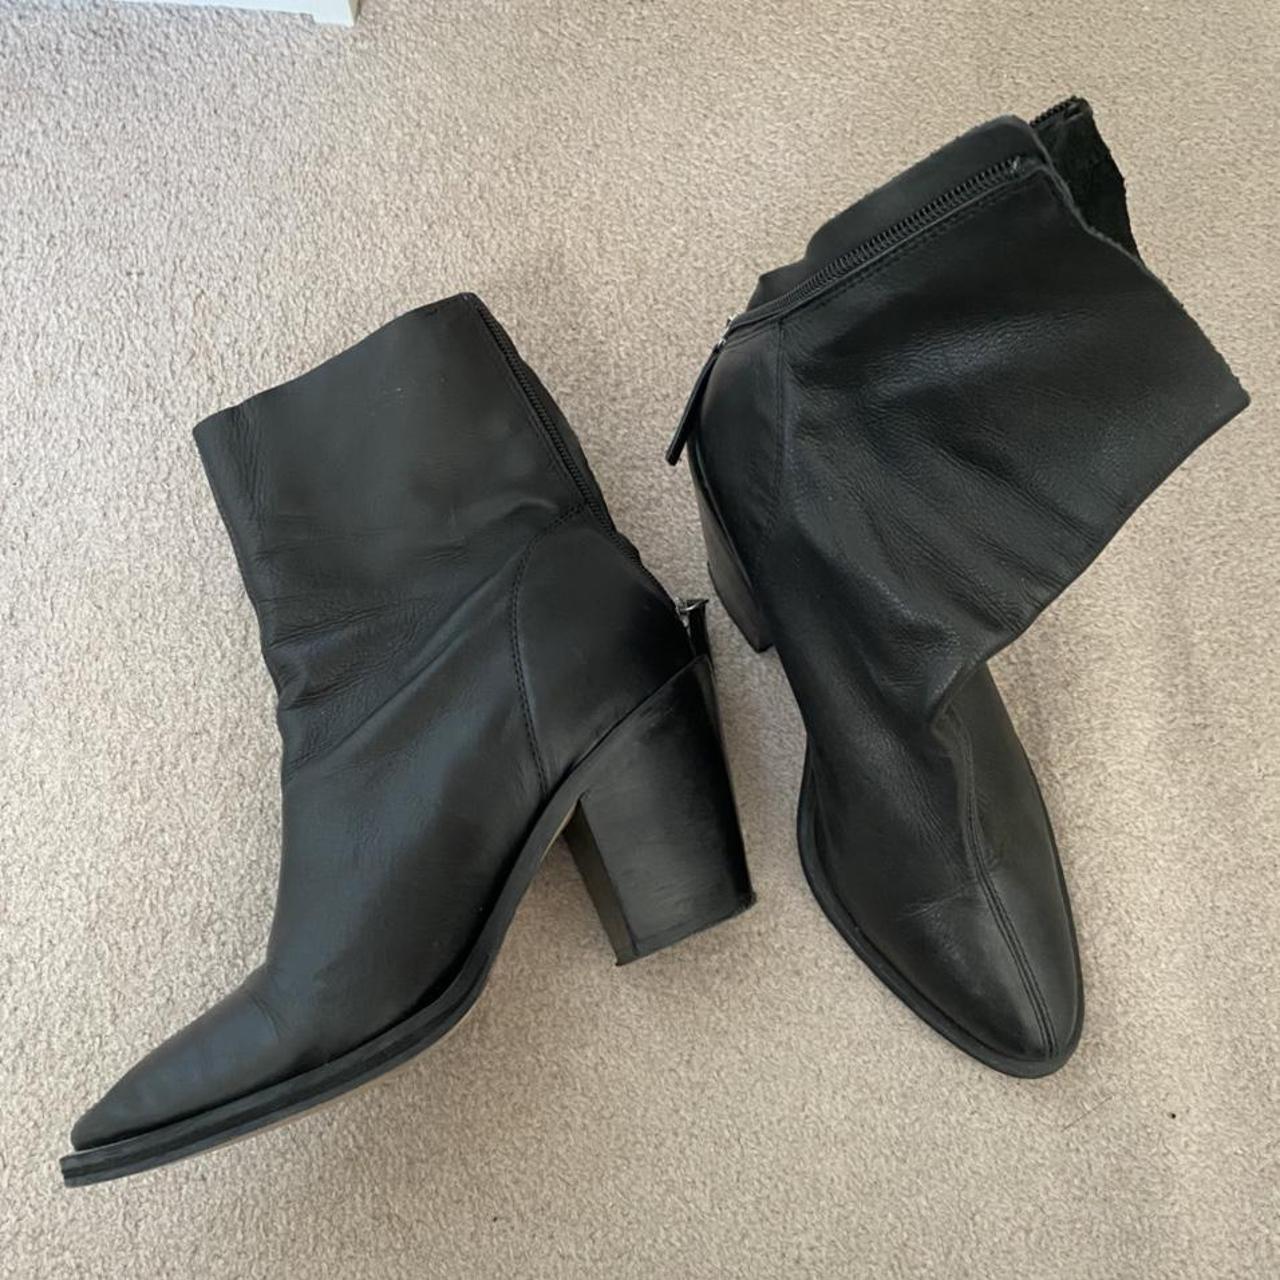 Product Image 2 - Topshop real leather ankle boots.